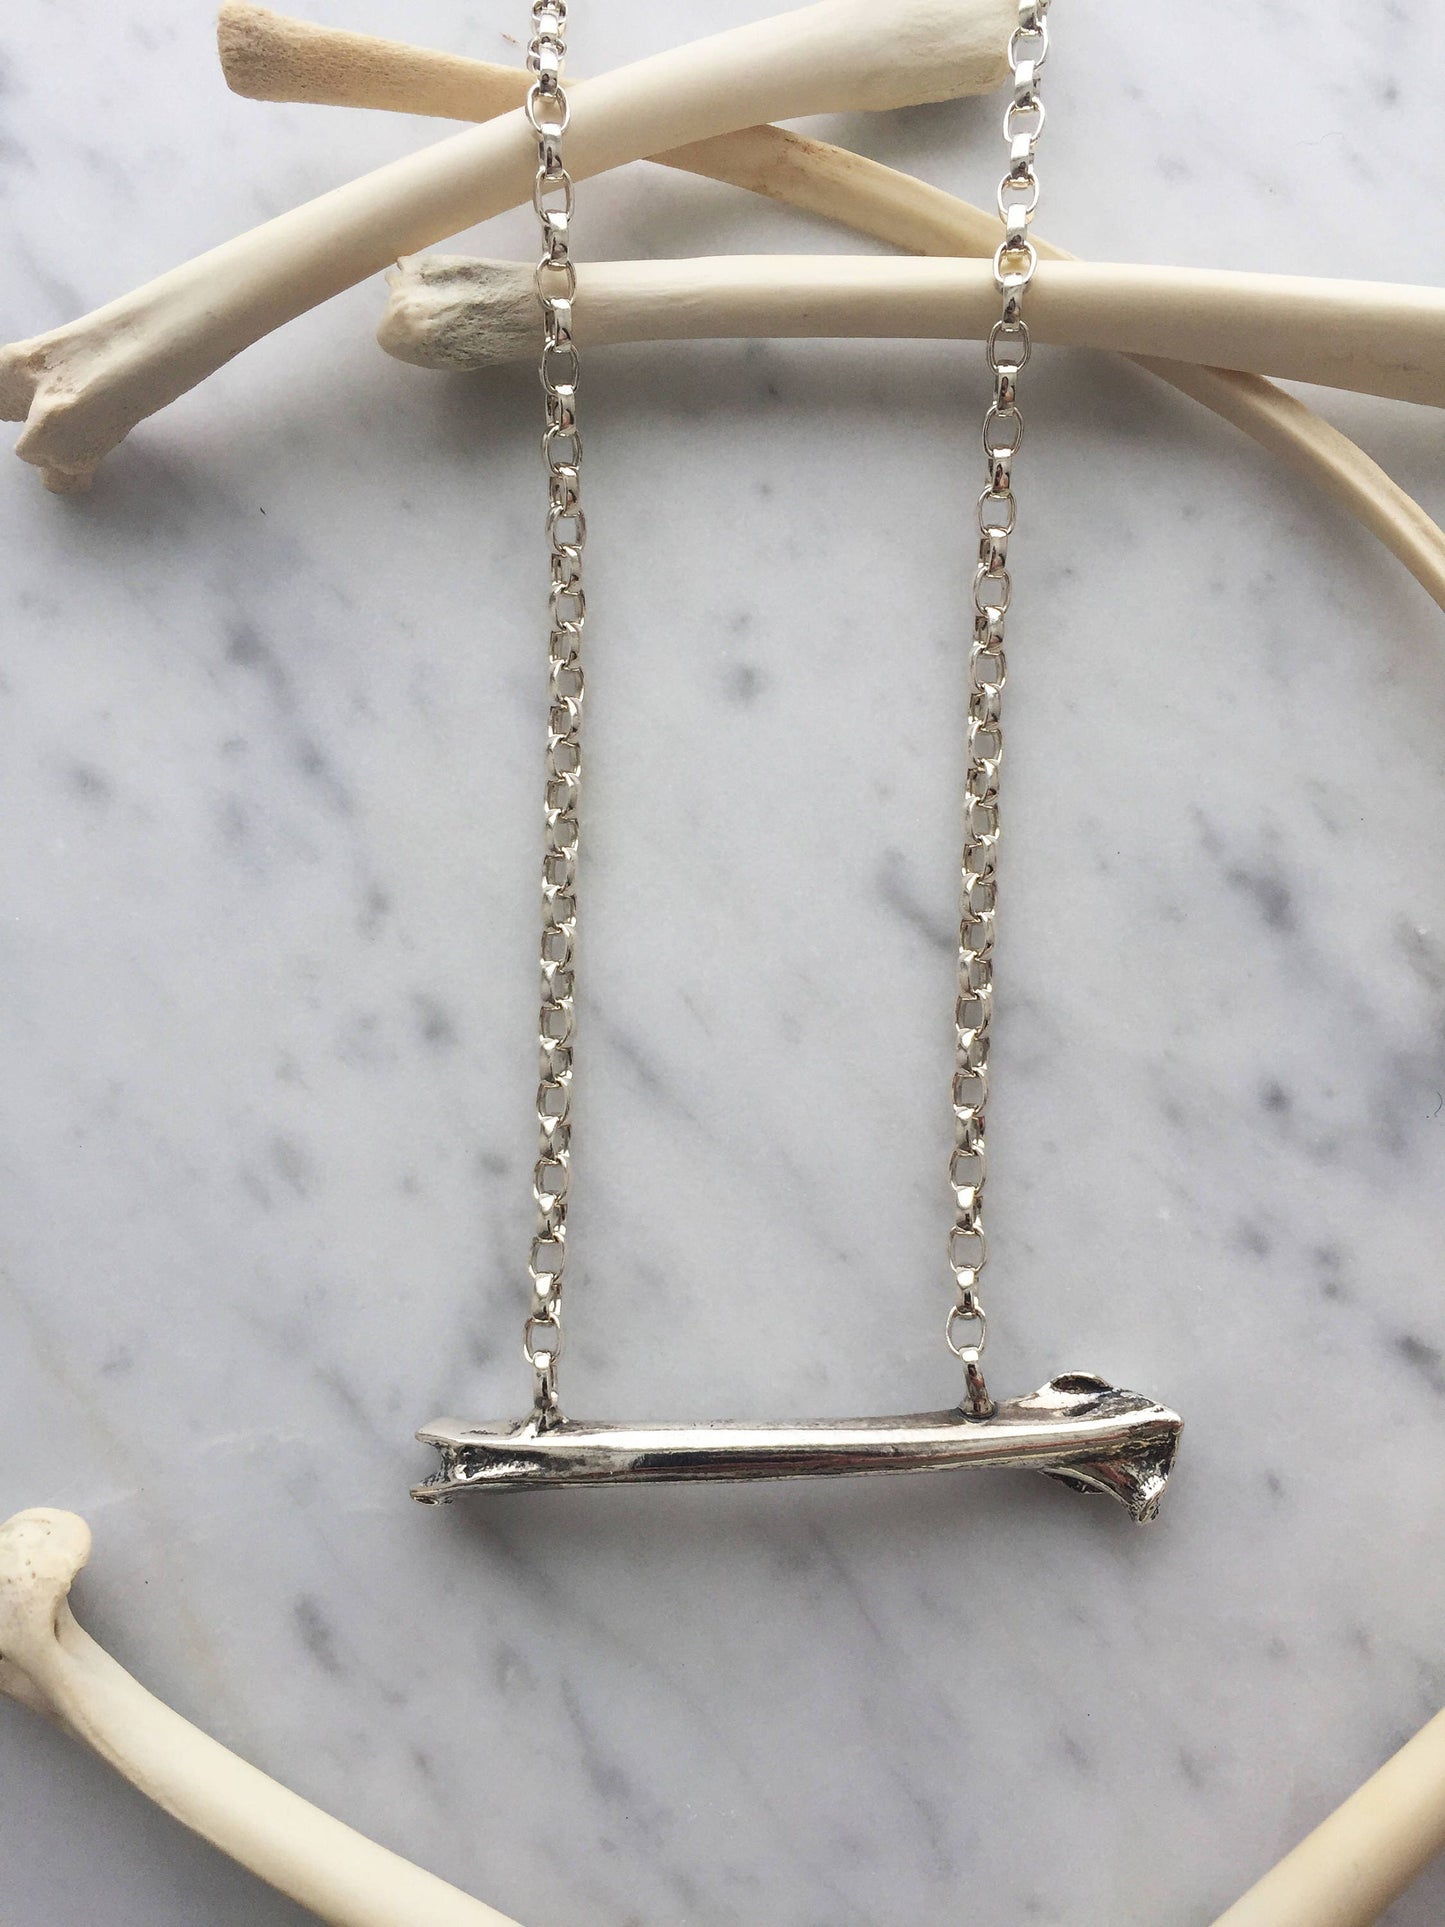 Rabbit Femur Necklace with Rollo Chain